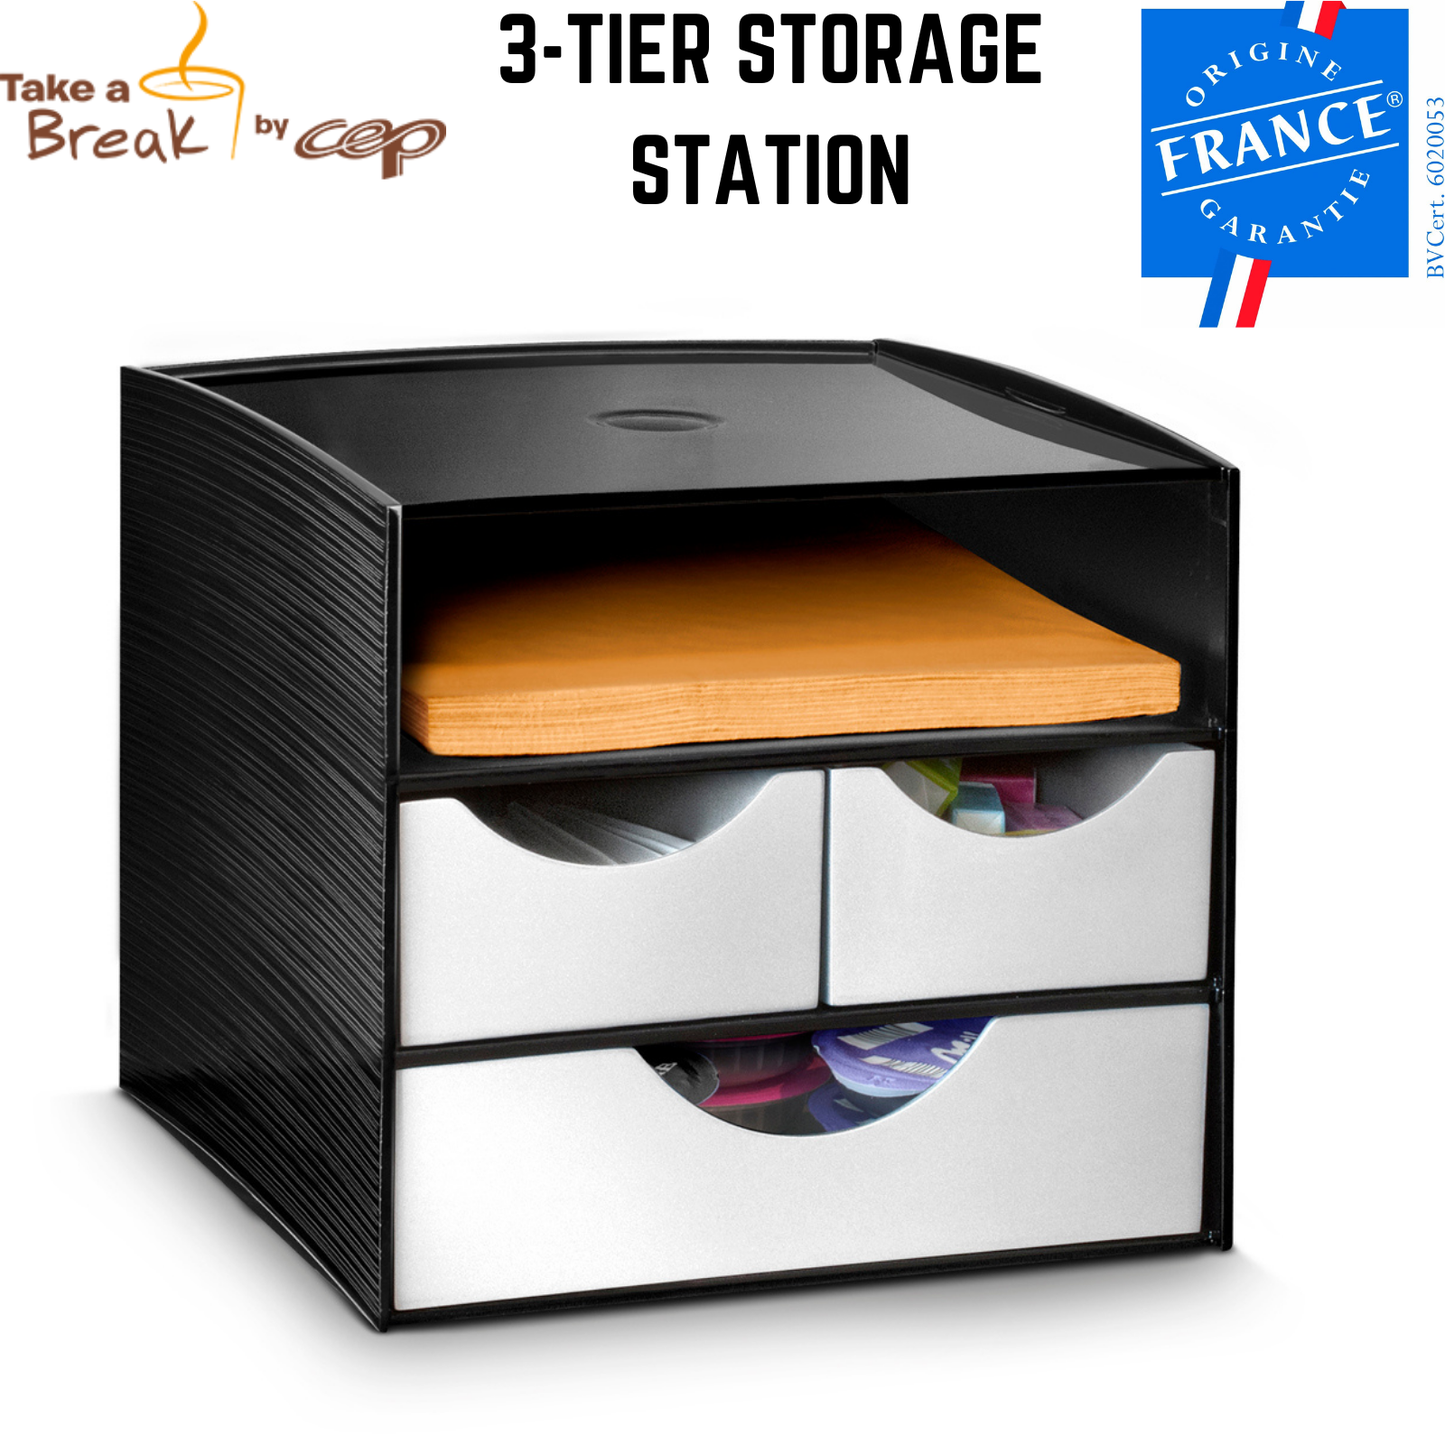 CEP 3 Tier Module Storage Station Home Office Black/Metallic Grey MADE IN FRANCE